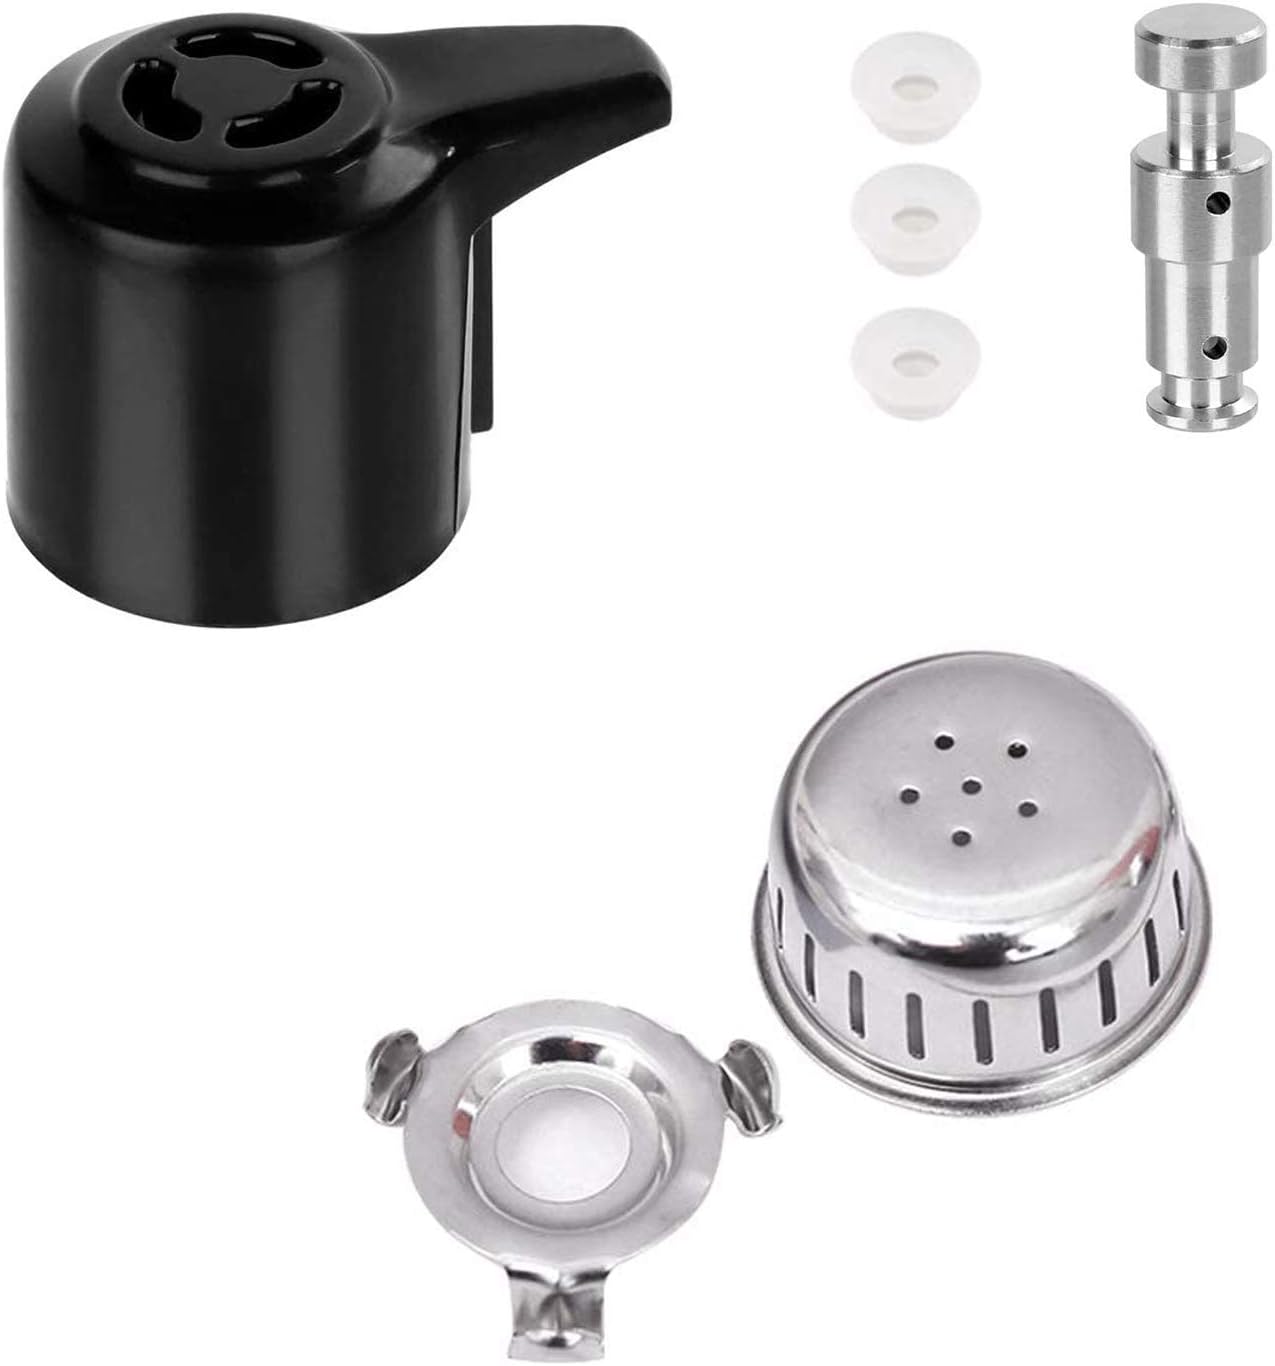 Generic Steam Release Handle,Original Float Valve Replacement Parts with 3 Silicone Caps for Instant Pot Duo 3, 5, 6 and 8 Quart,Duo Pl